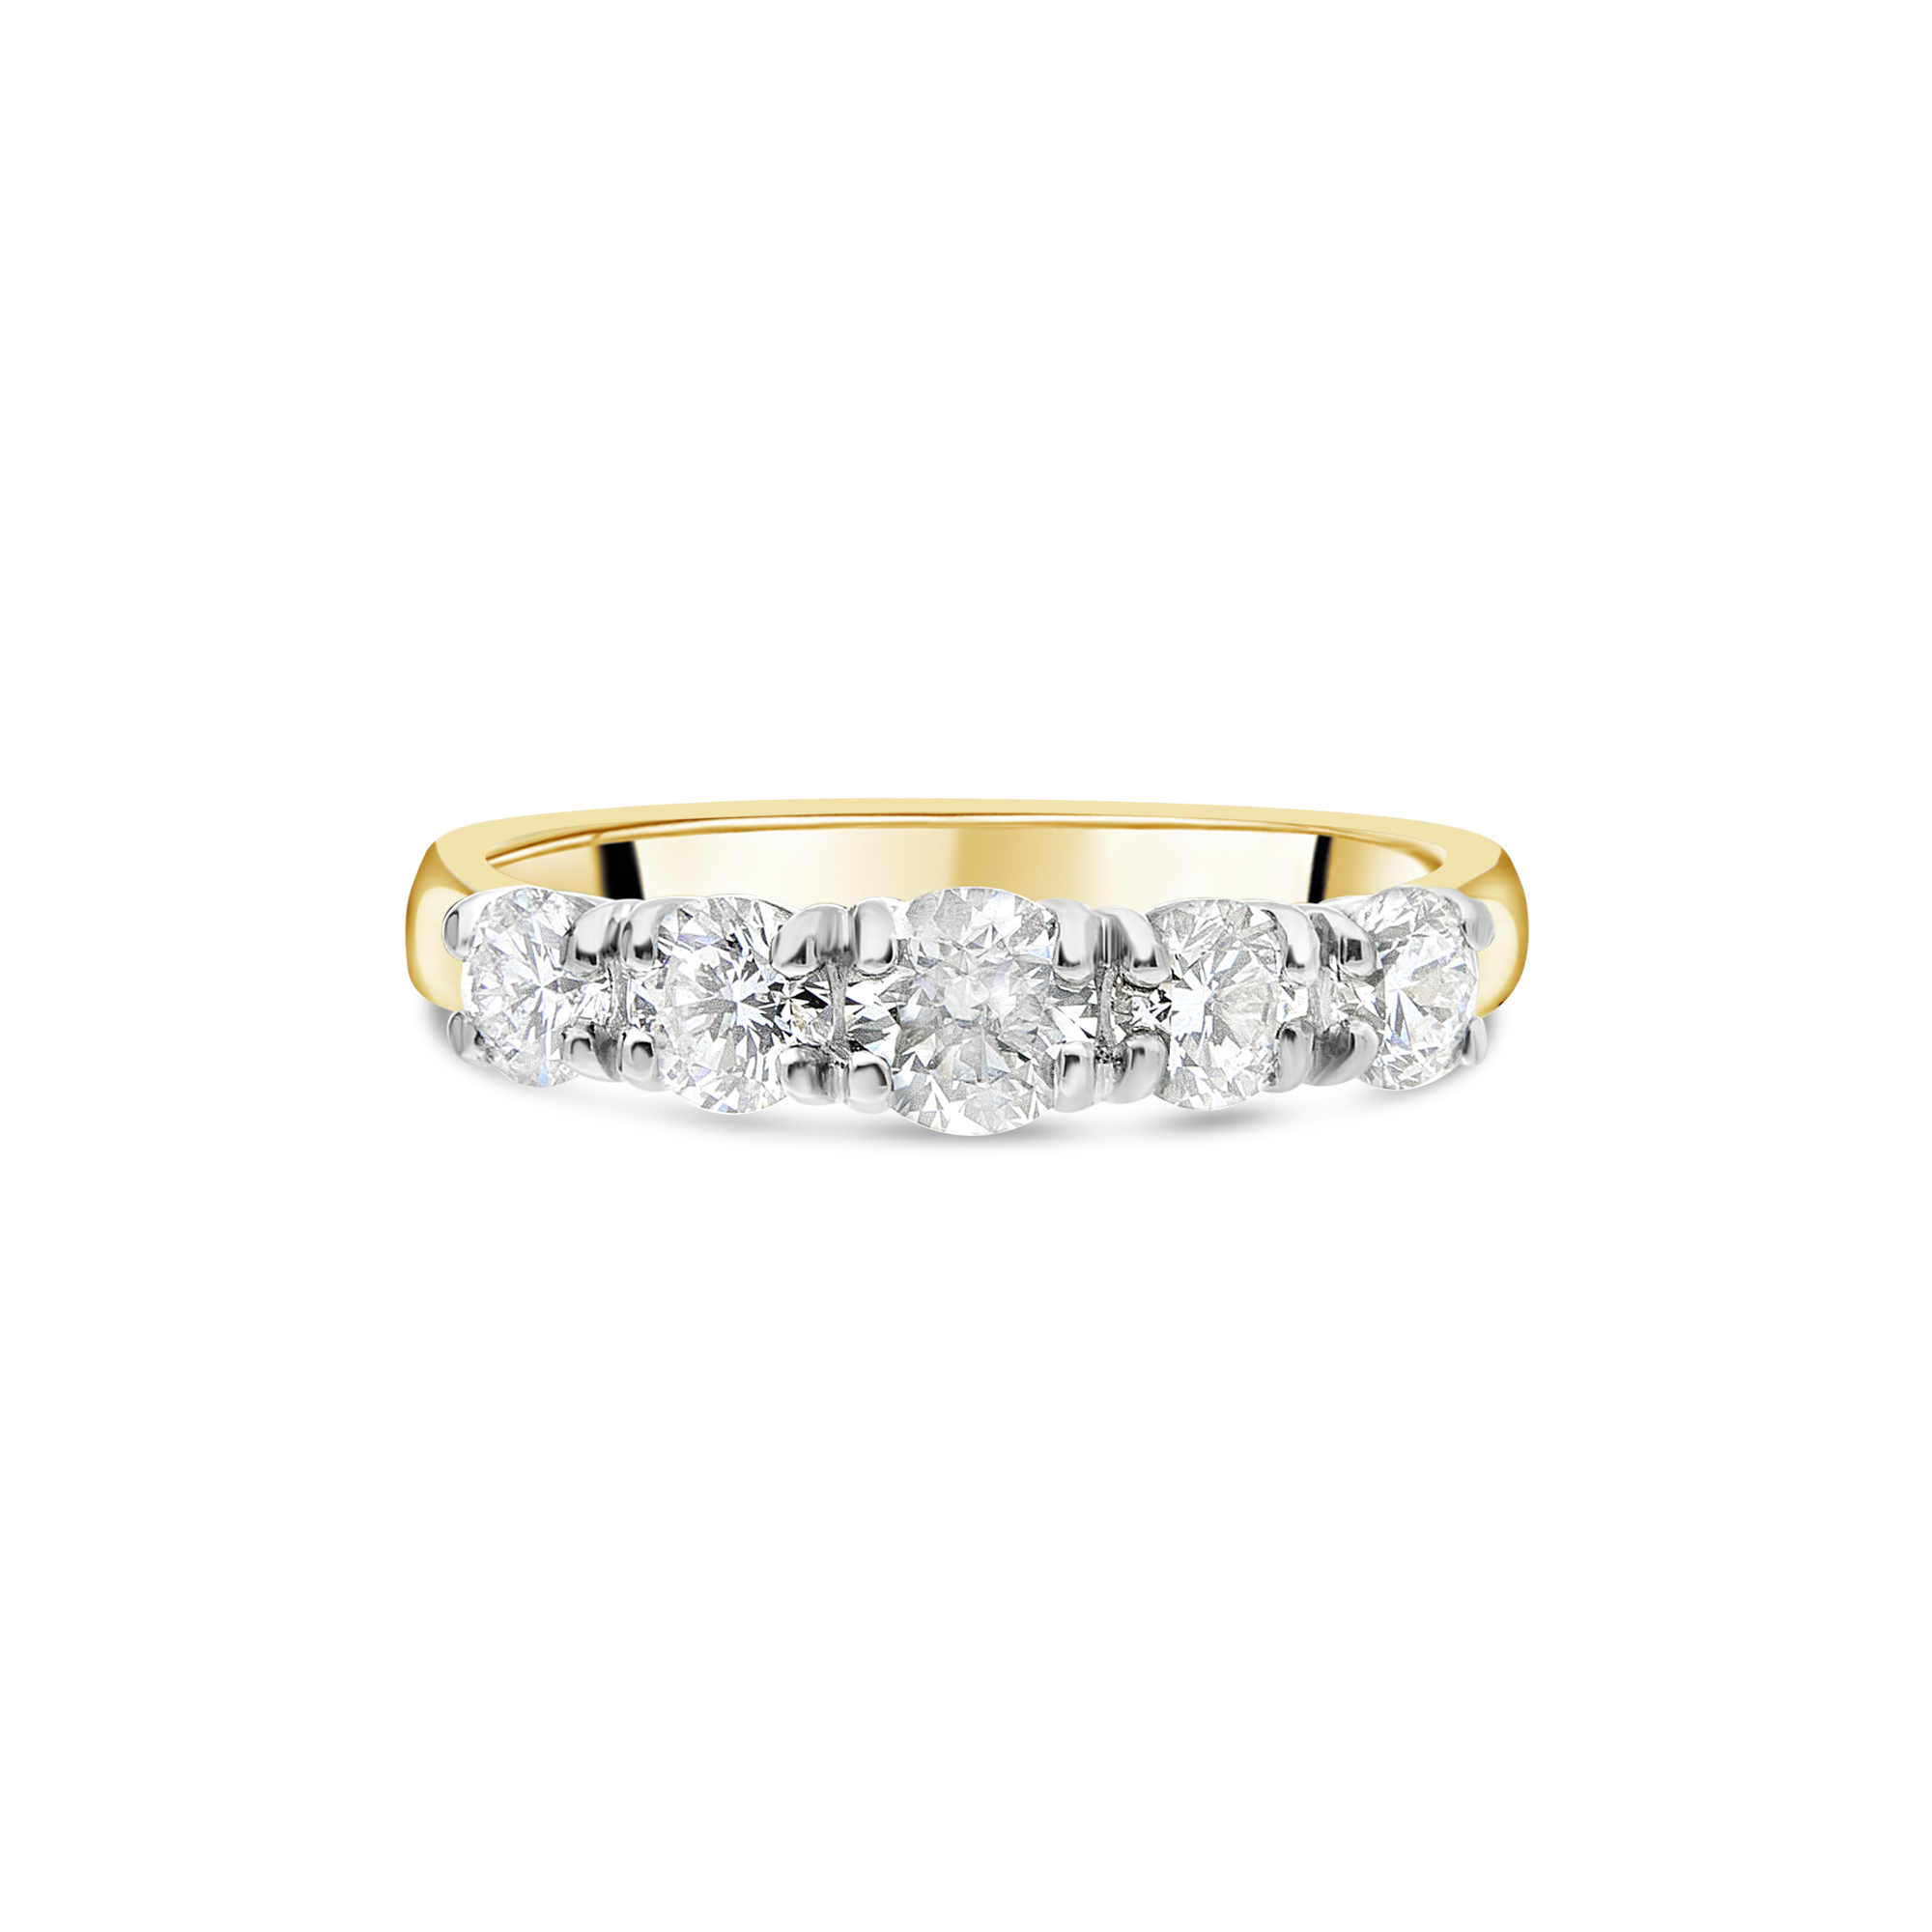 The "Galeria" Ring, Yellow Gold